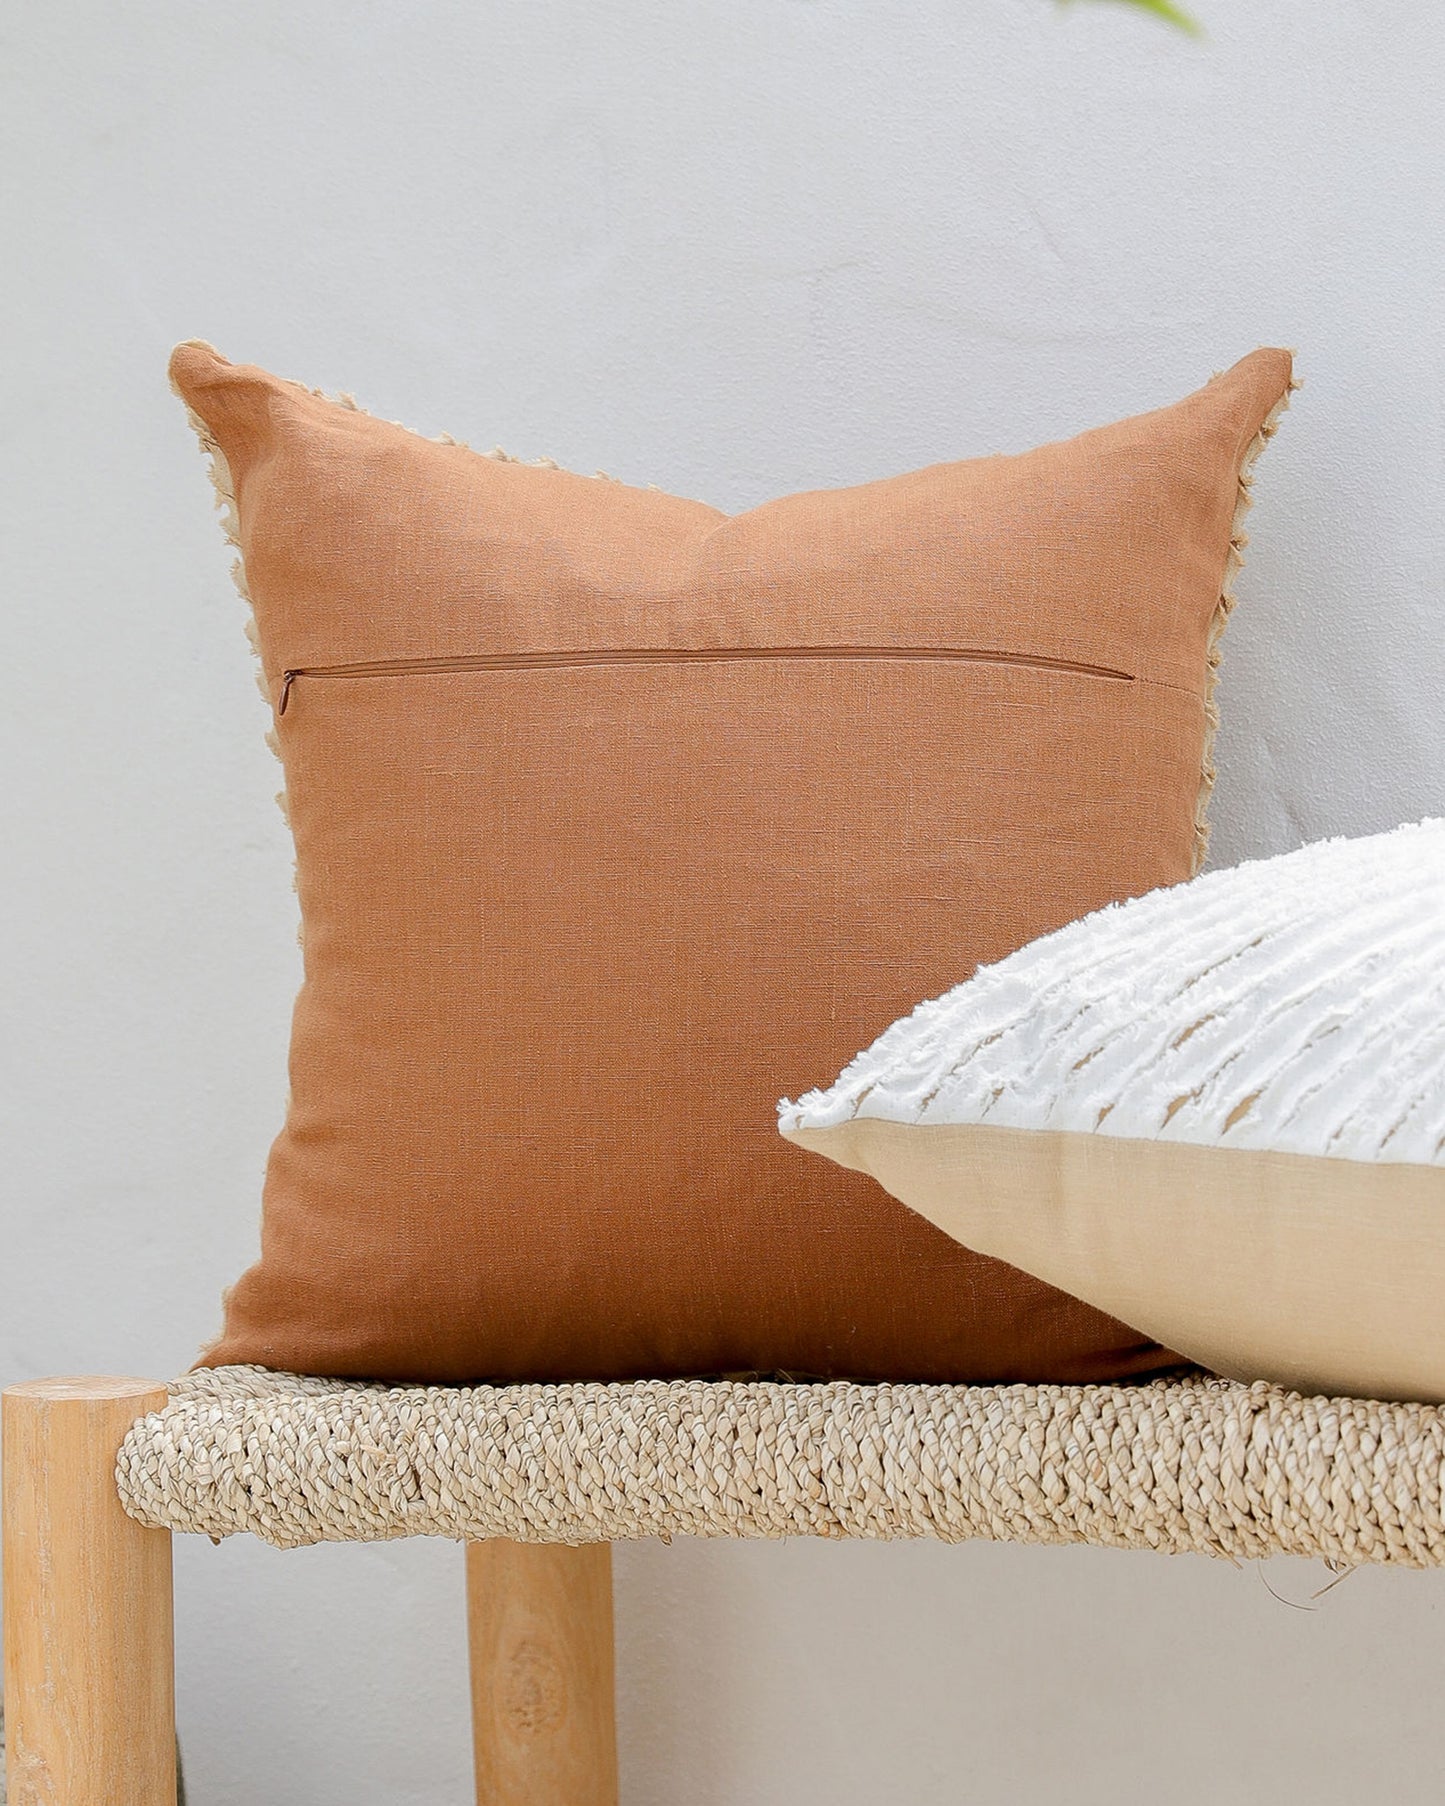 Decorative linen pillow cover with striped fabric in Sandy beige & Cinnamon - MagicLinen